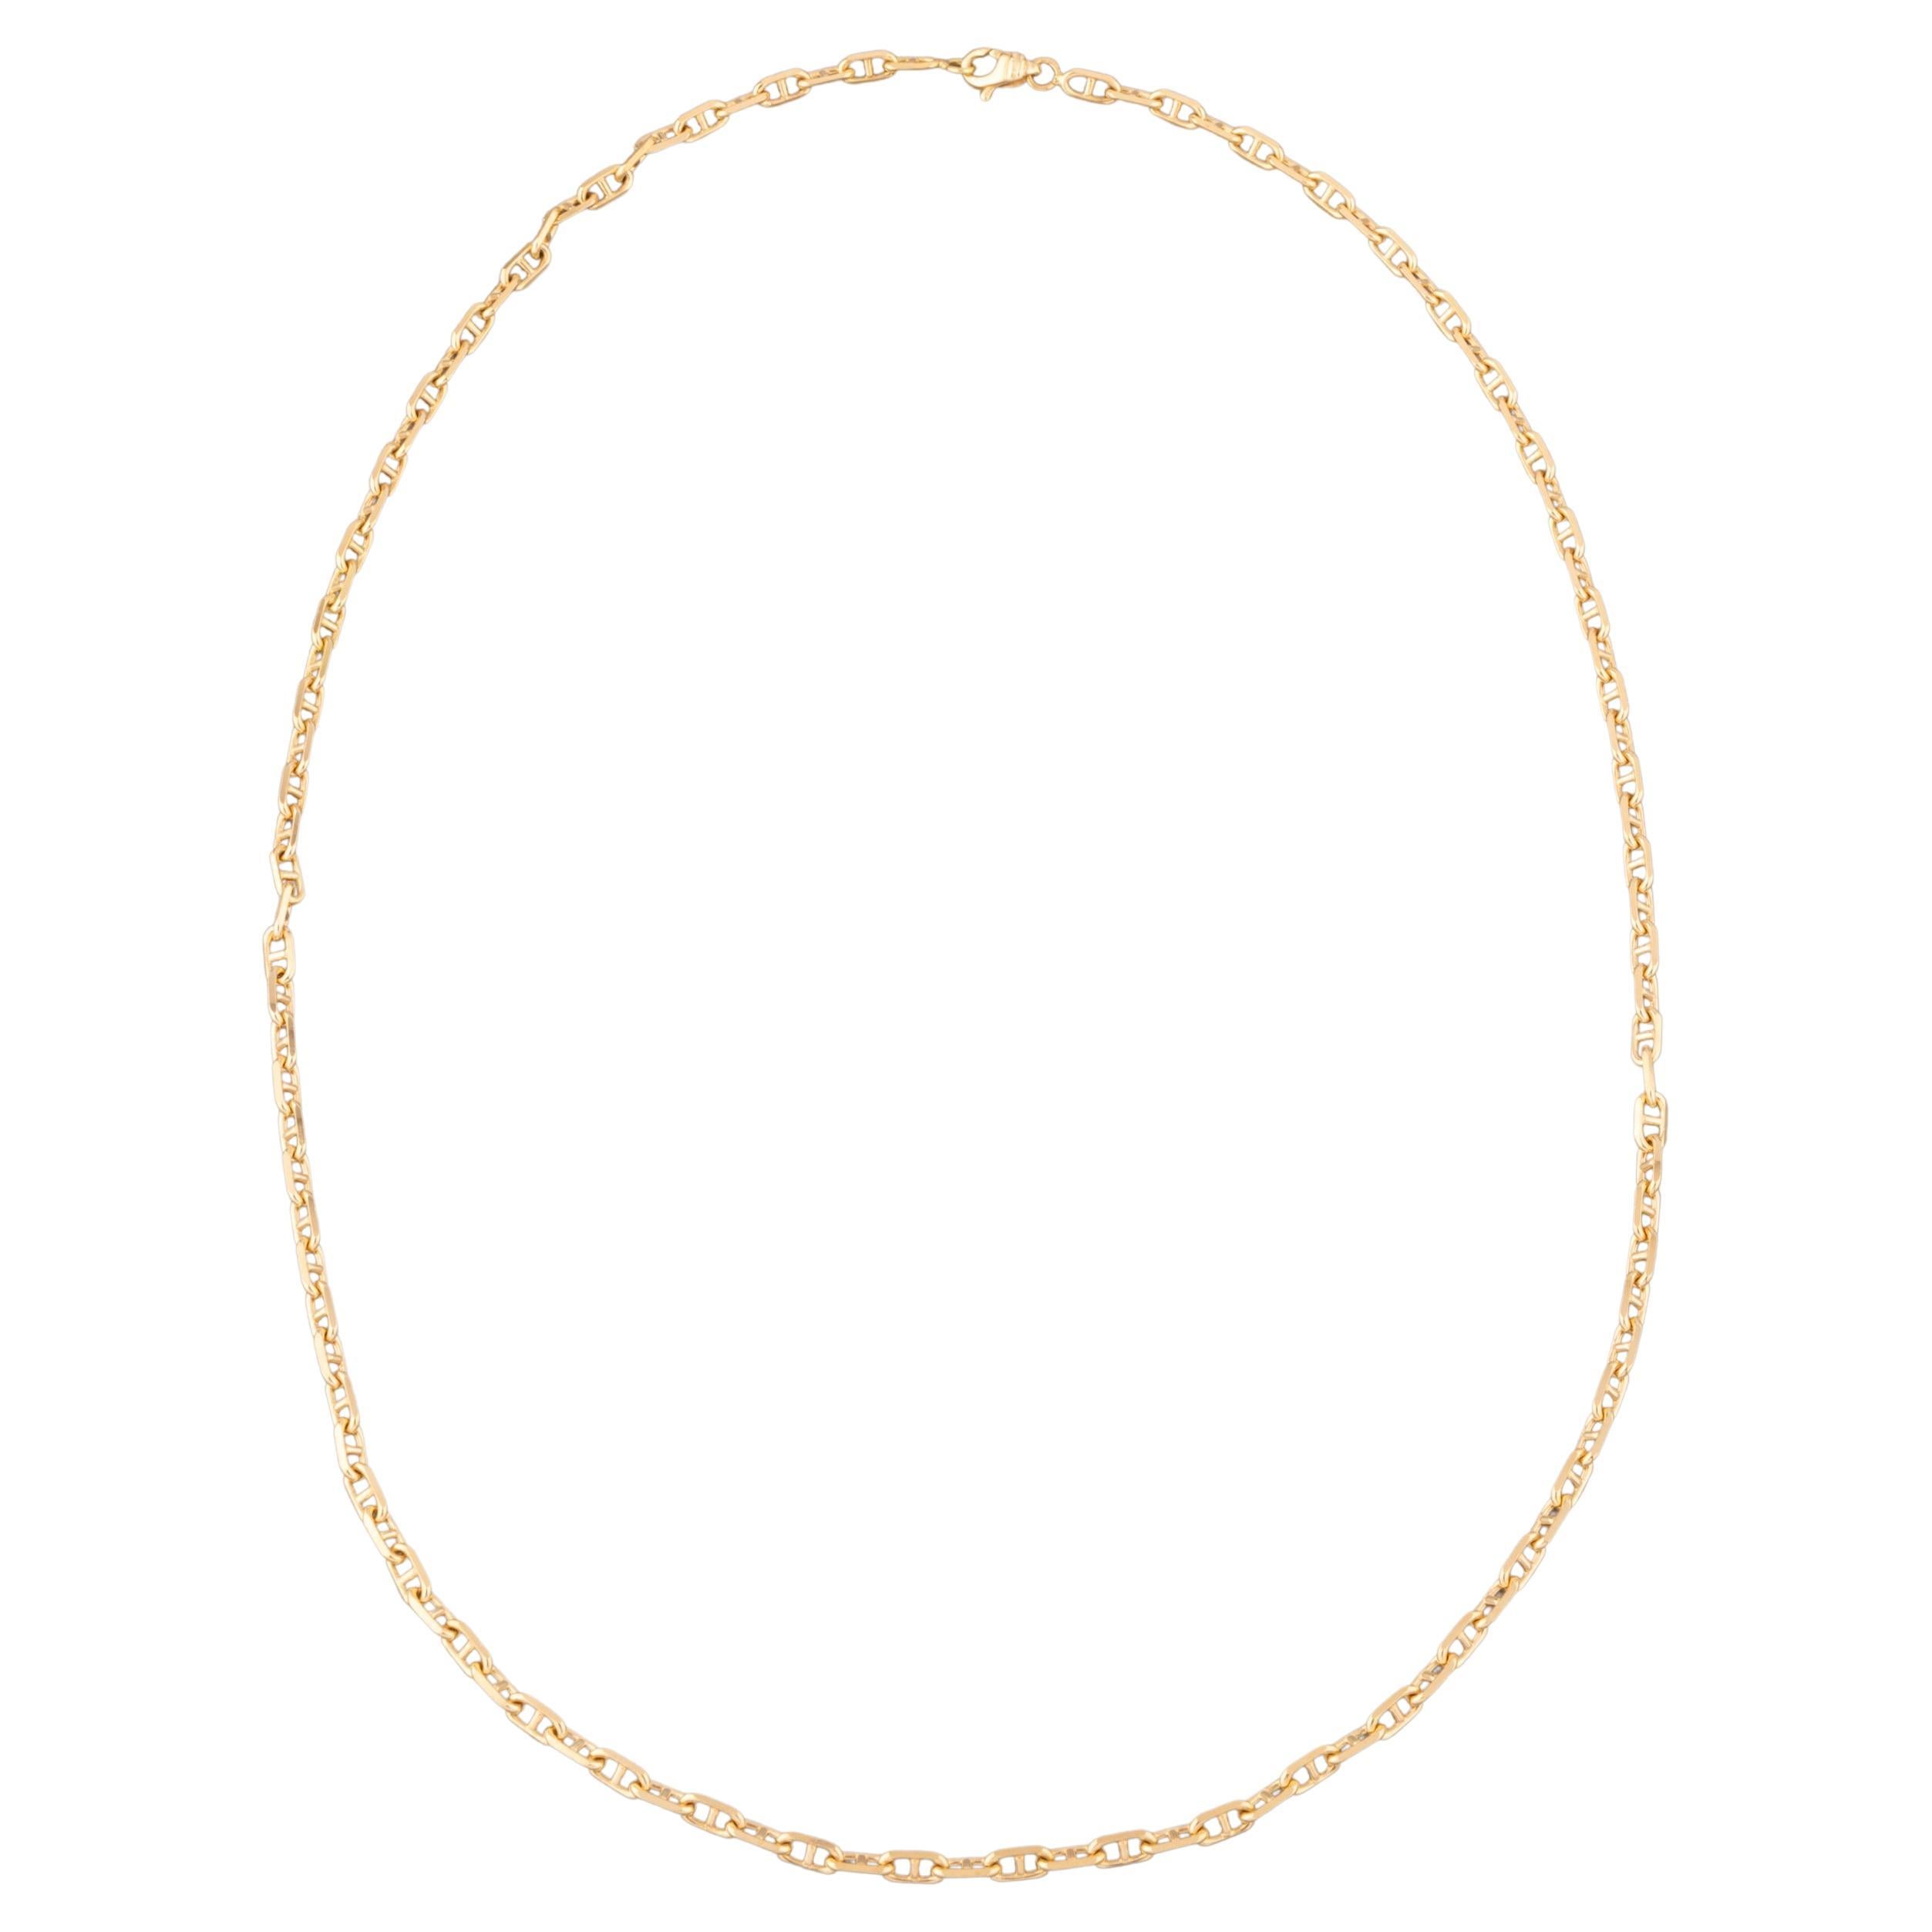 French Vintage Gold Chain Necklace